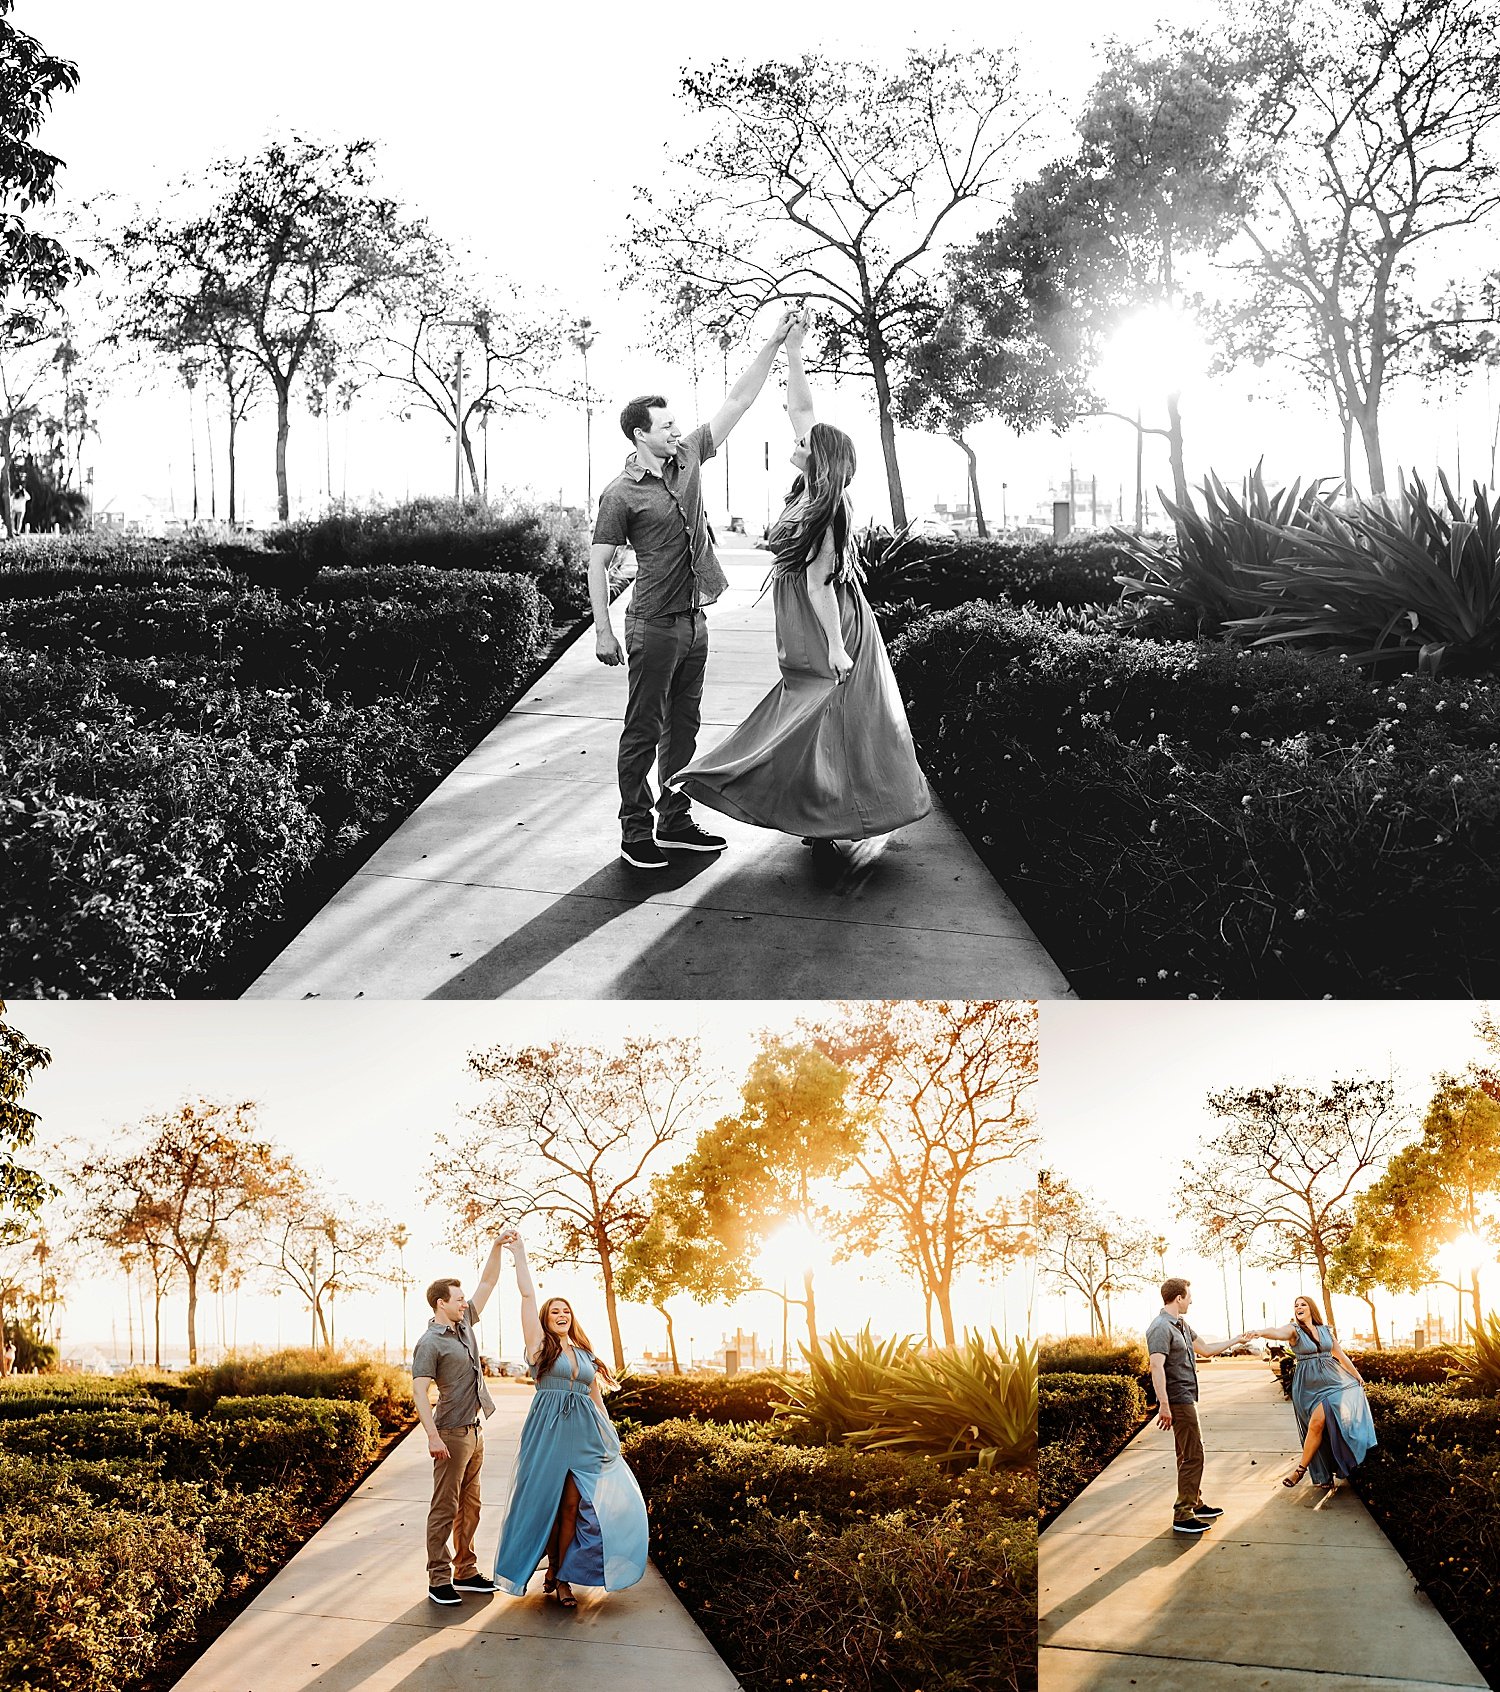  Man spend woman on brick path during engagement session by Christa paustenbaugh photographer 